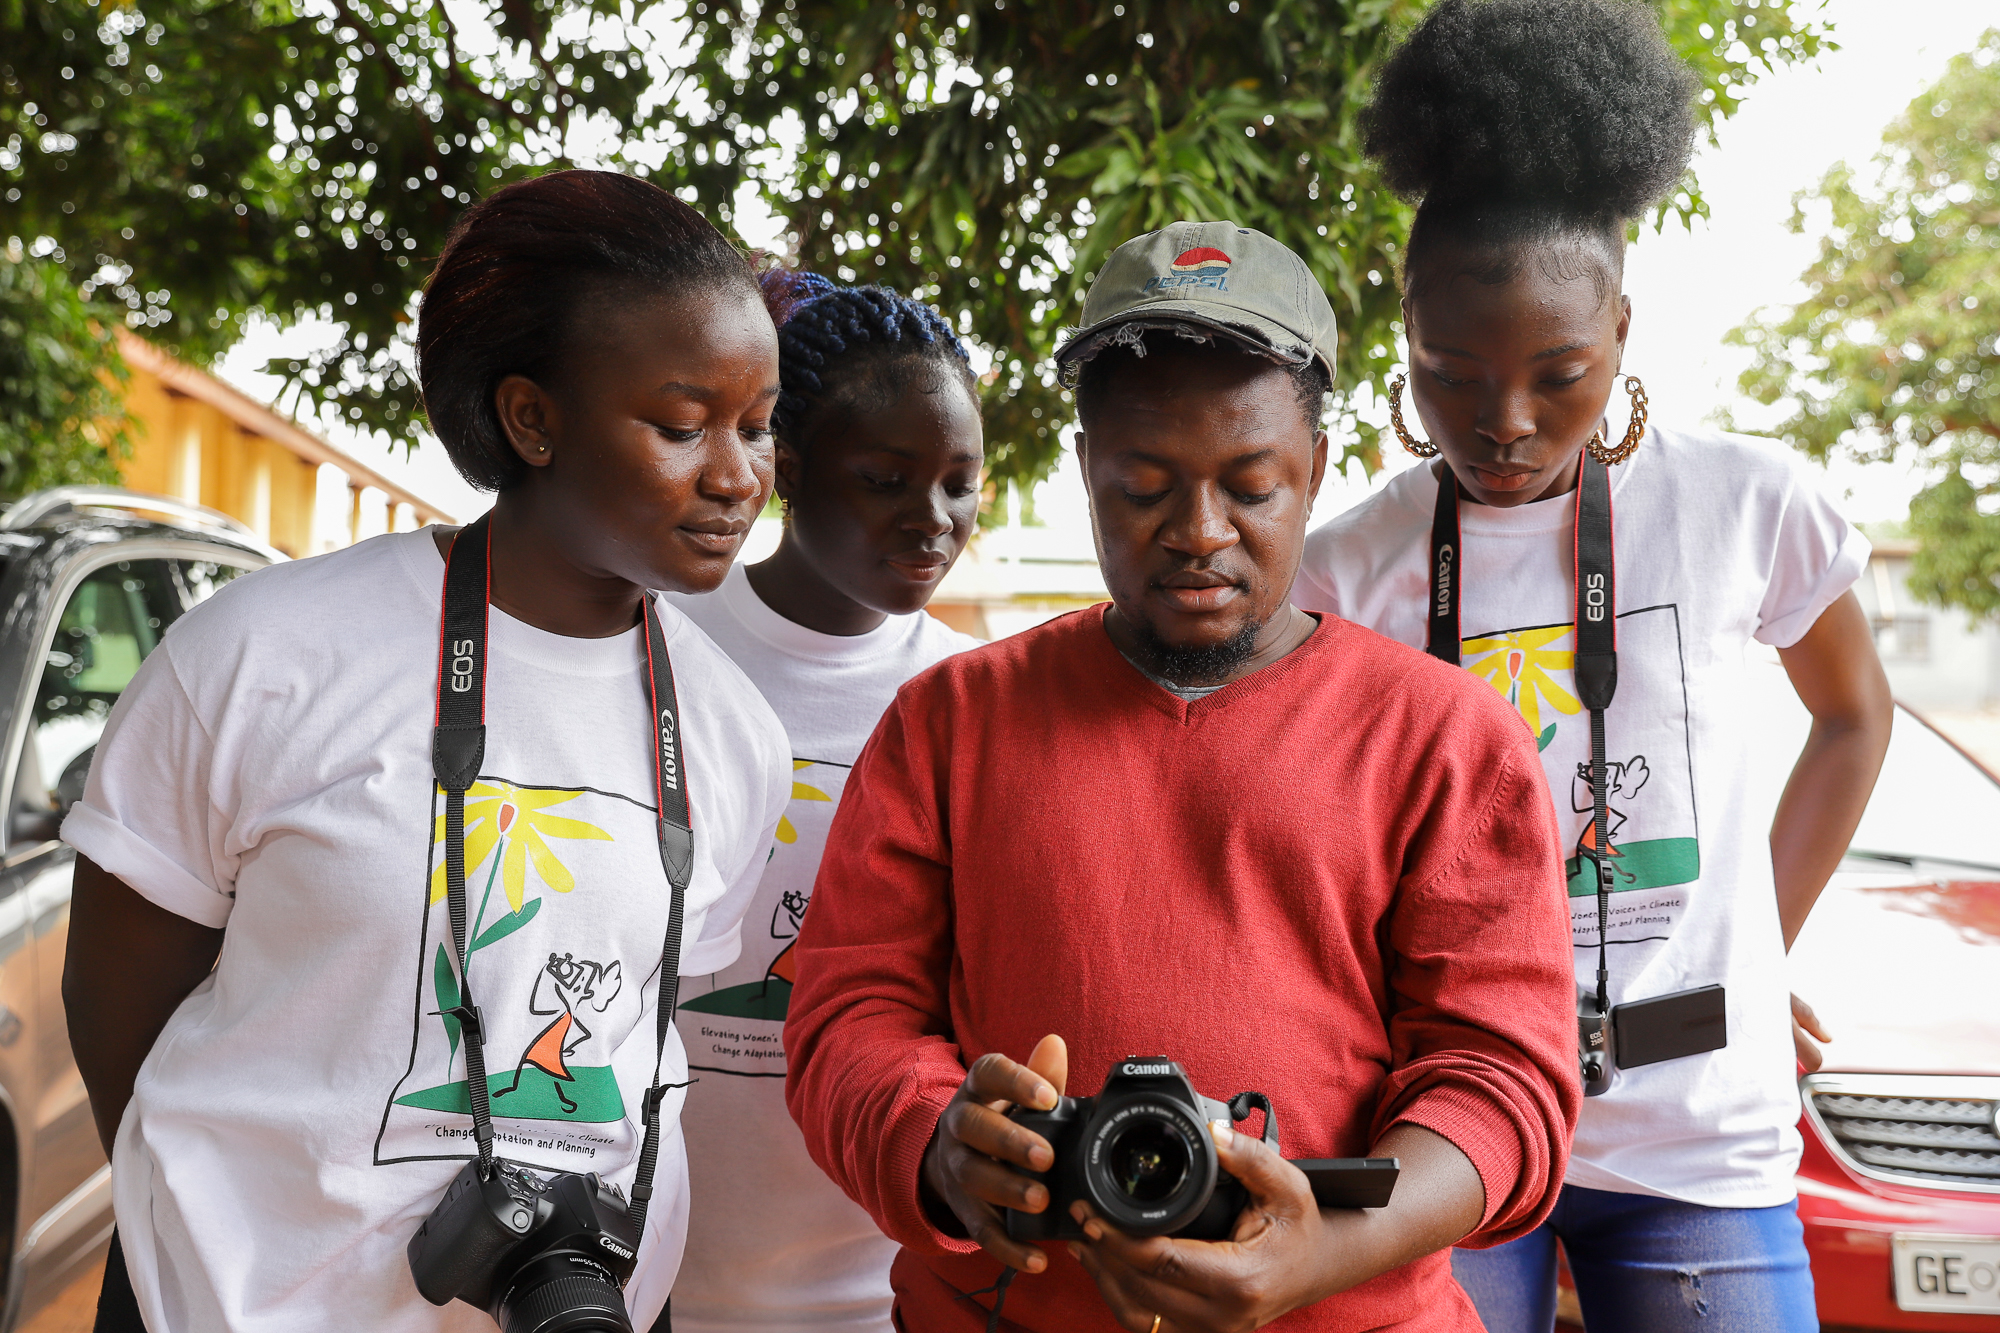 Photo: Photographer and Envisioning Resilience facilitator Francis Kokoroko in a hands-on session with participants at a workshop on photography and climate change adaptation in Tamale, Ghana (from left to right: Jennifer Atinyo, Dorcas Abban, Francis Kokoroko, Belinda Alhassan). Credit: Dennis Nipah, Ghana (2021).